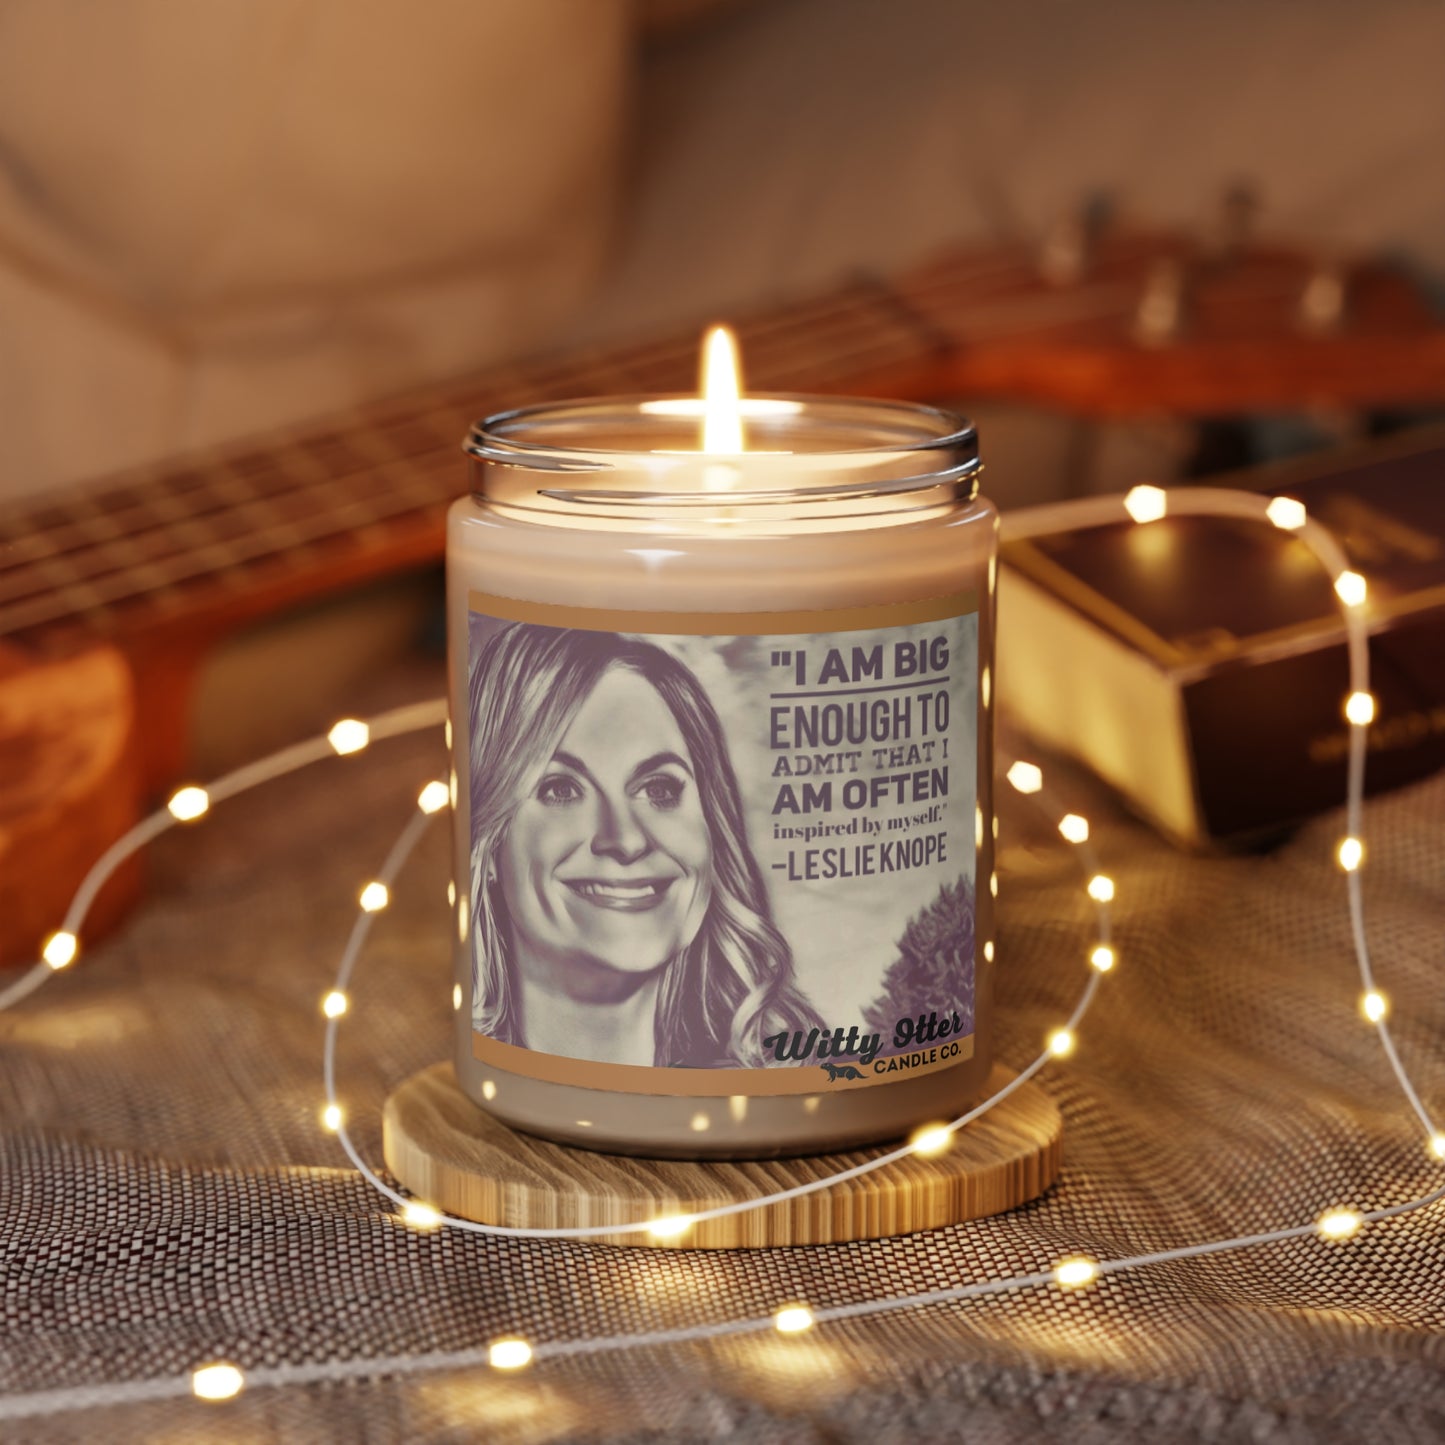 Leslie Knope "Inspiration" quote 9oz soy candle | Parks and Recreation show candle